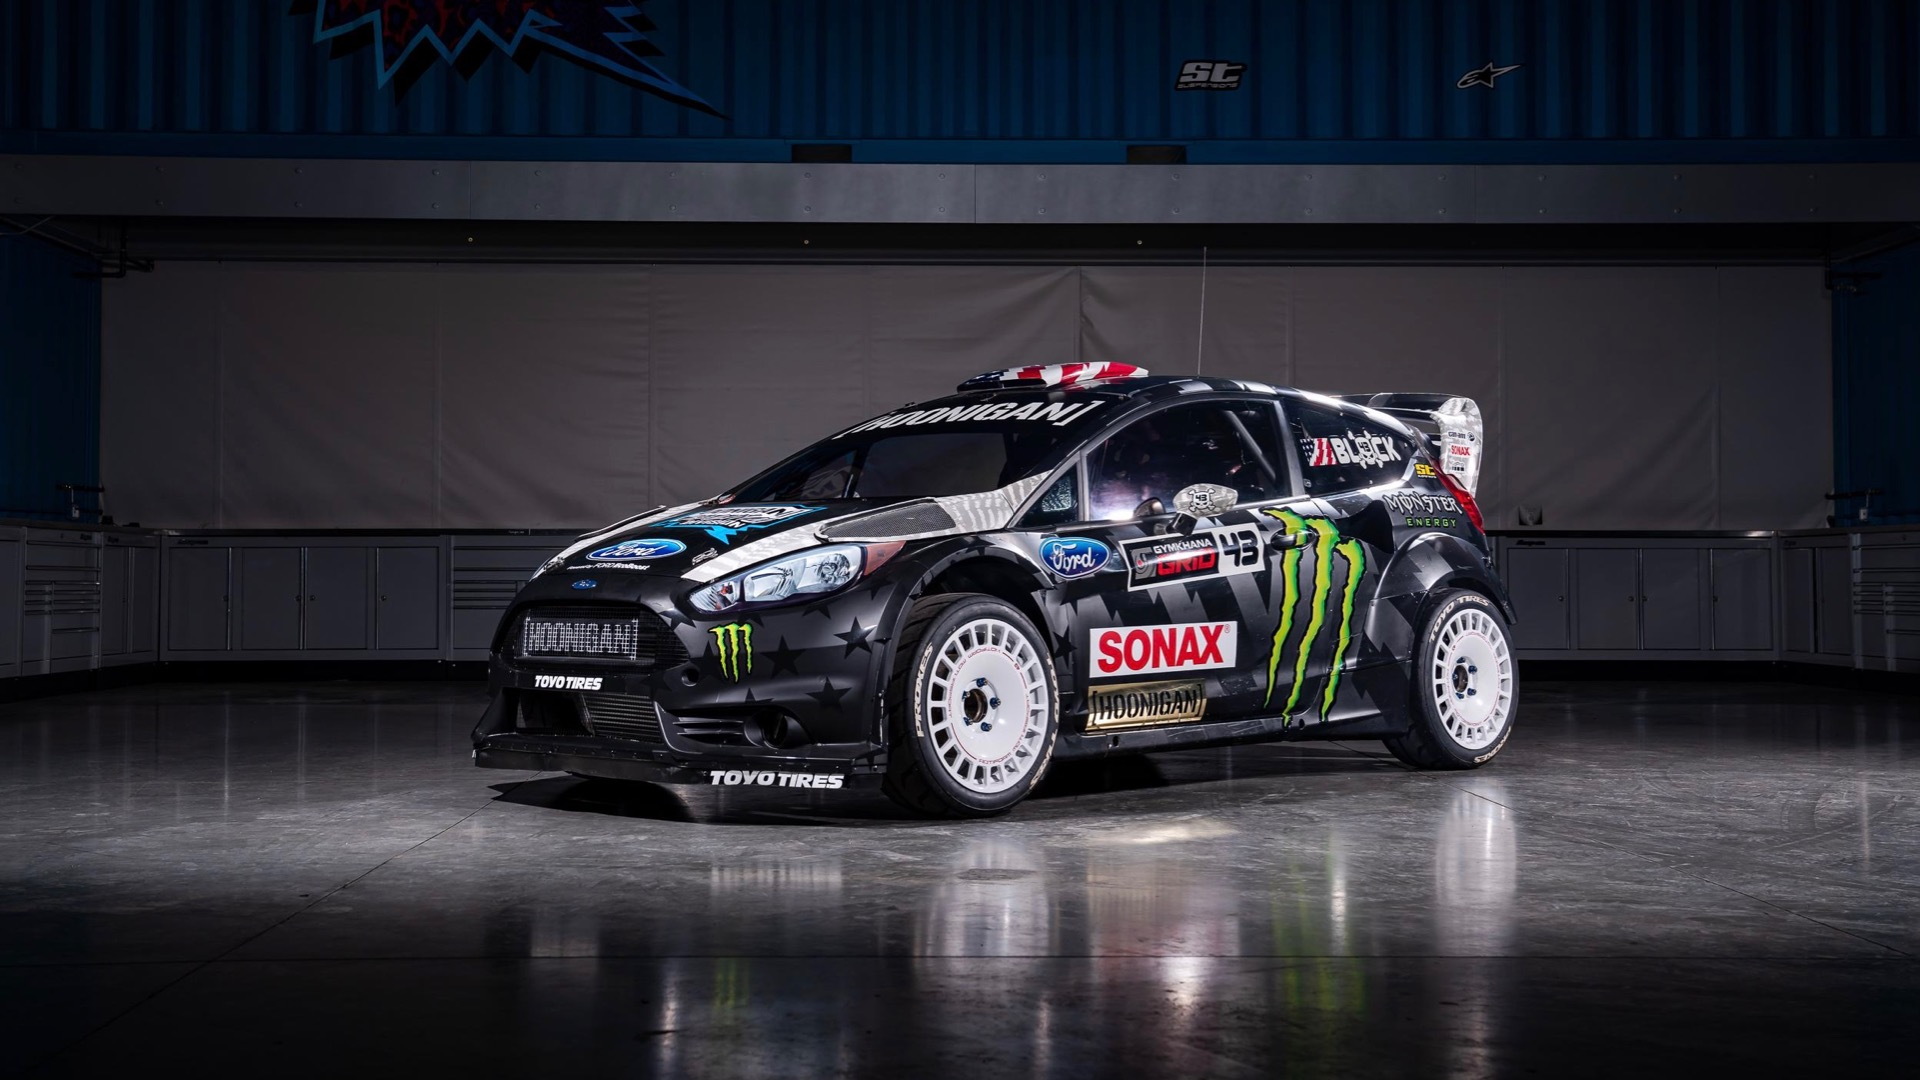 Ken Block's 2013 Ford Fiesta rally car (Photo by LBI Limited)